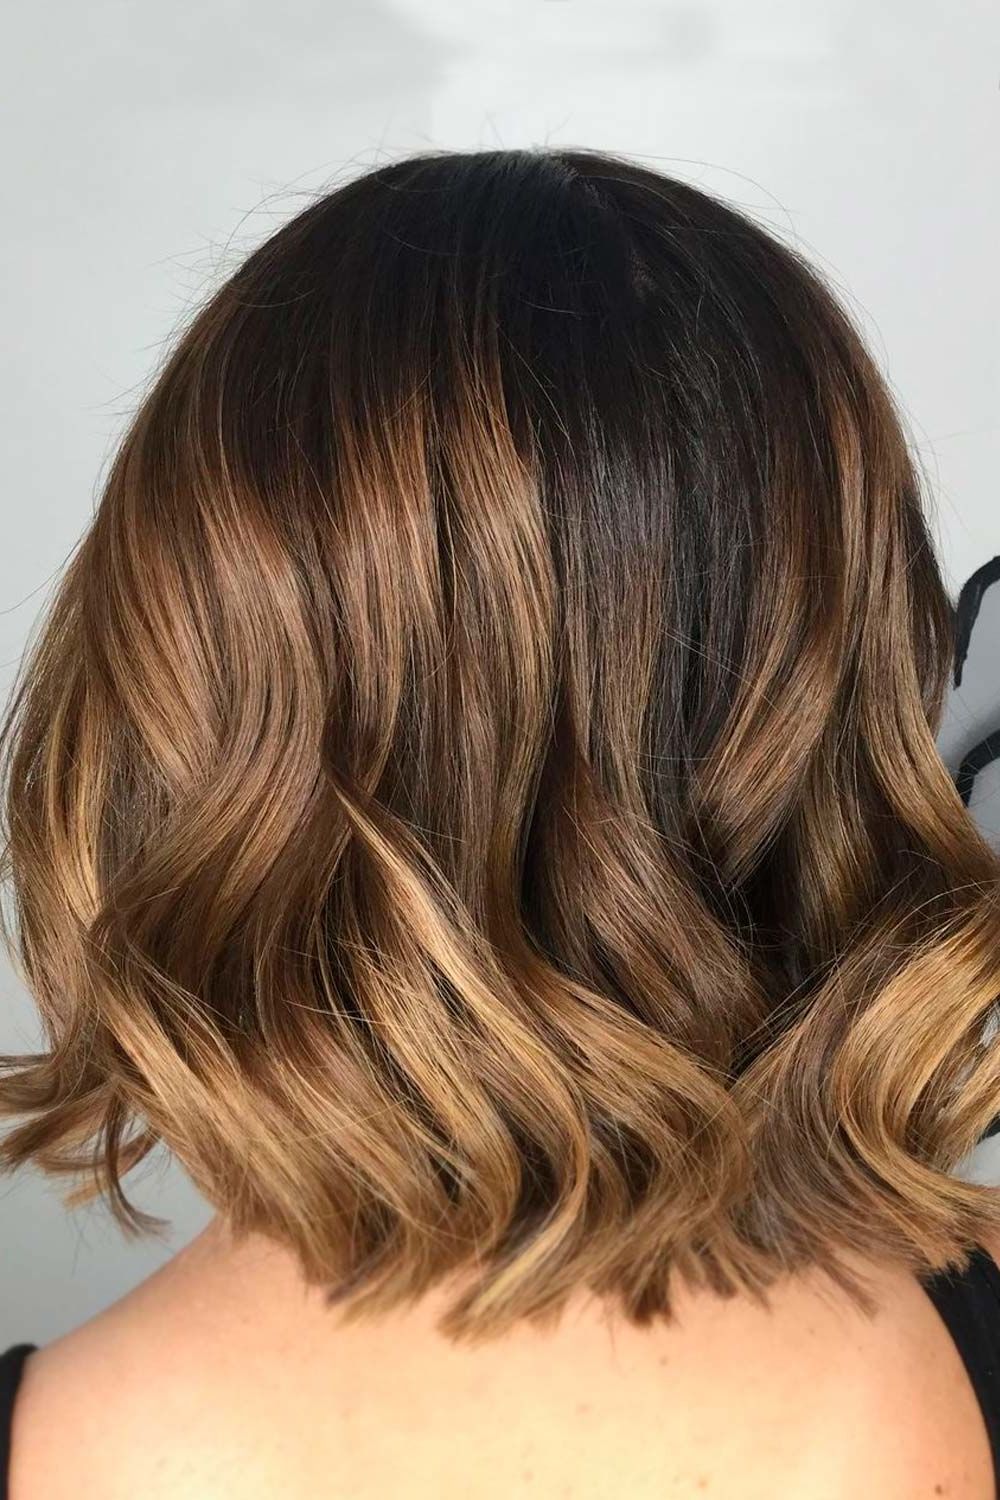 Untraditional Lob Haircut Ideas To Give A Try | Lovehairstyles Intended For Most Recently A Line Lob Haircuts (View 25 of 25)